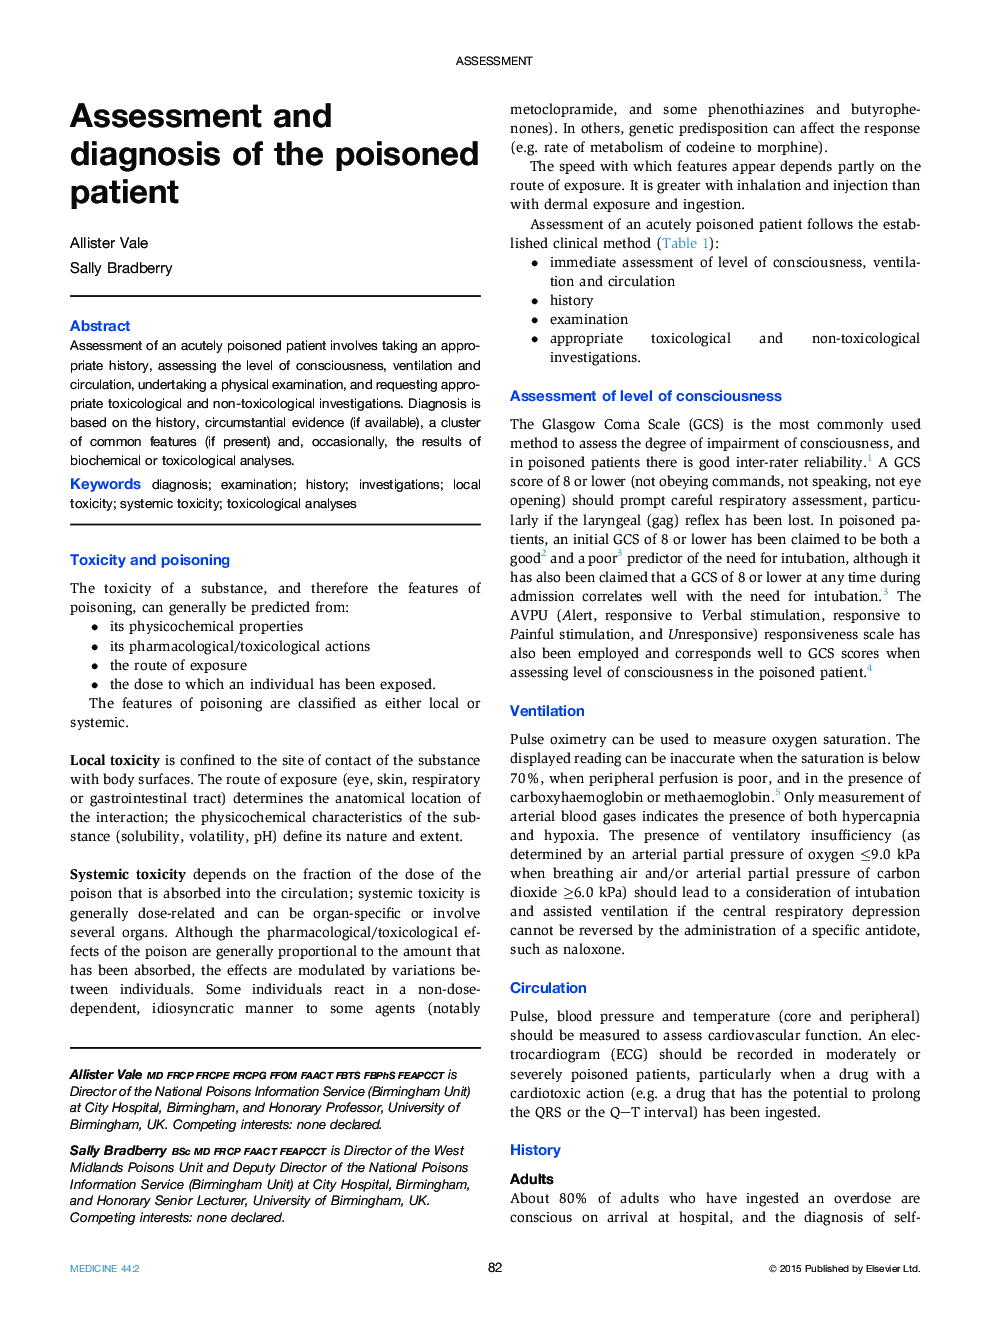 Assessment and diagnosis of the poisoned patient